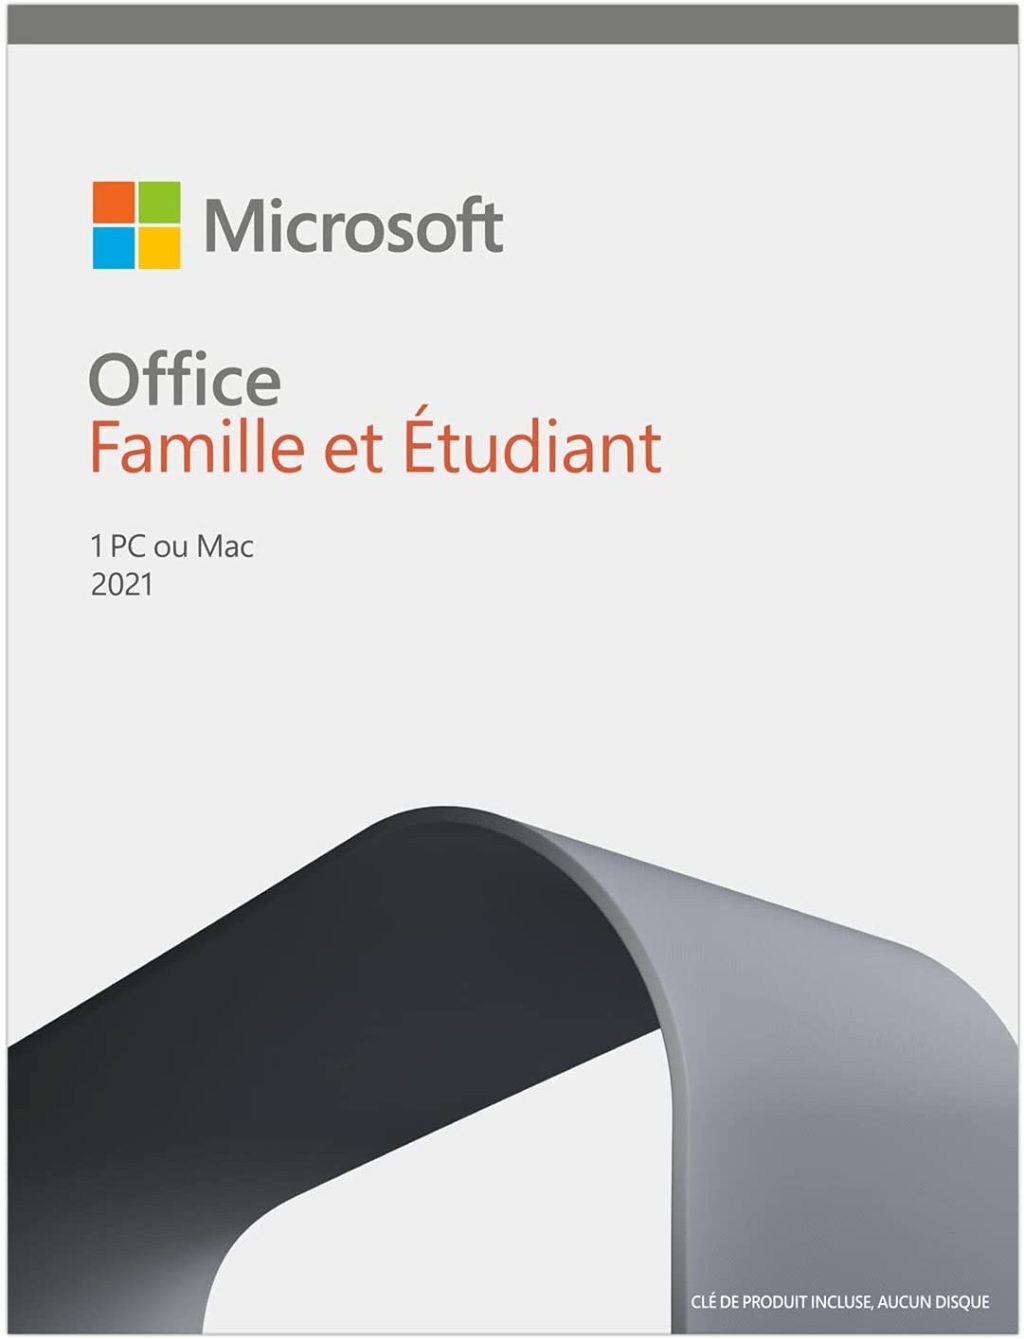 Download Microsoft Office 2021 Home and Student for free on Futura